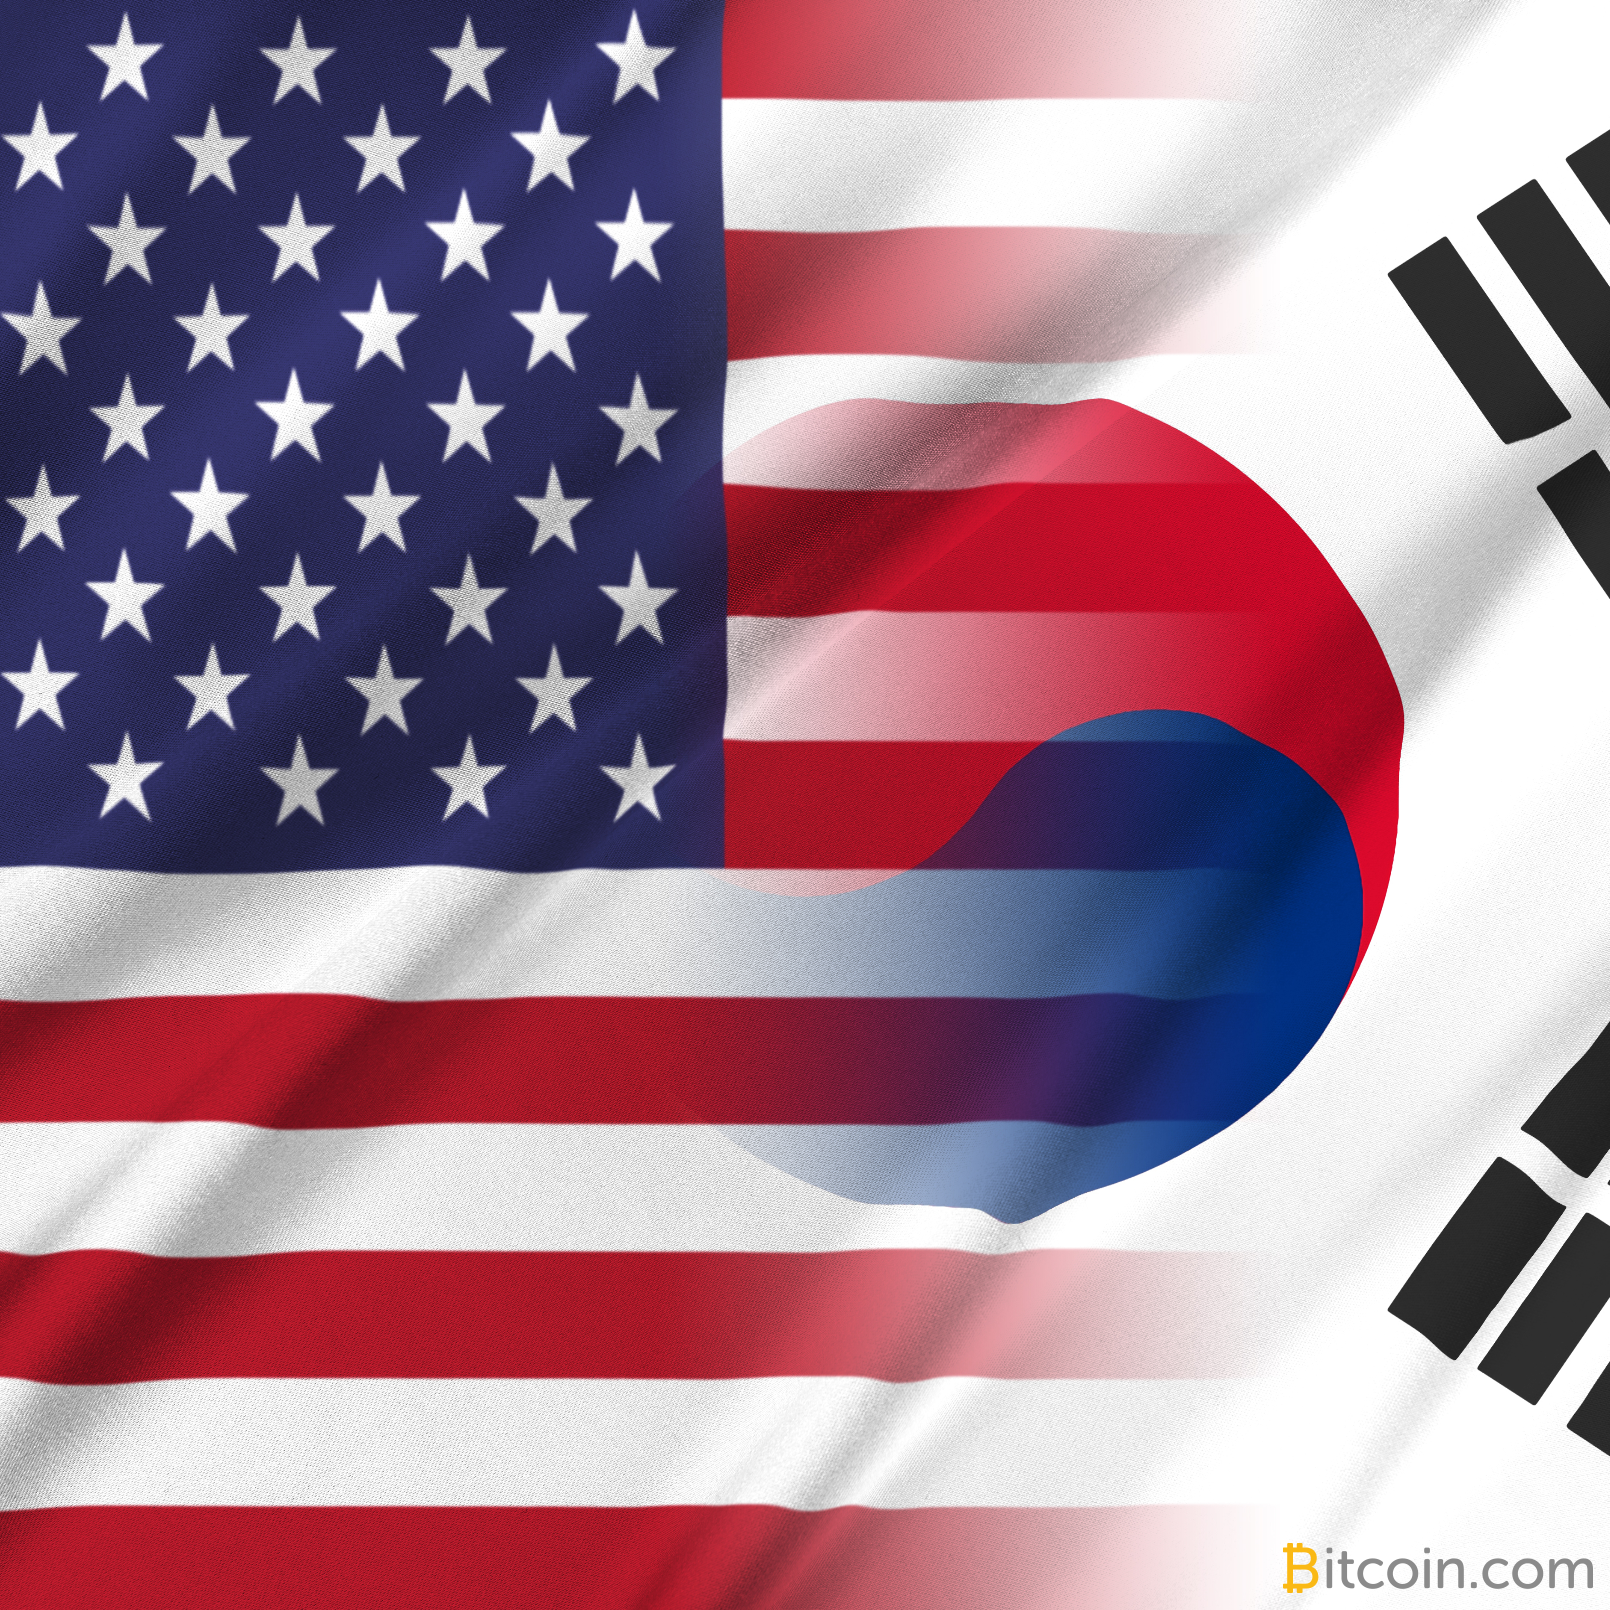 US Financial Regulator Requests Crypto Trading Data From South Korea